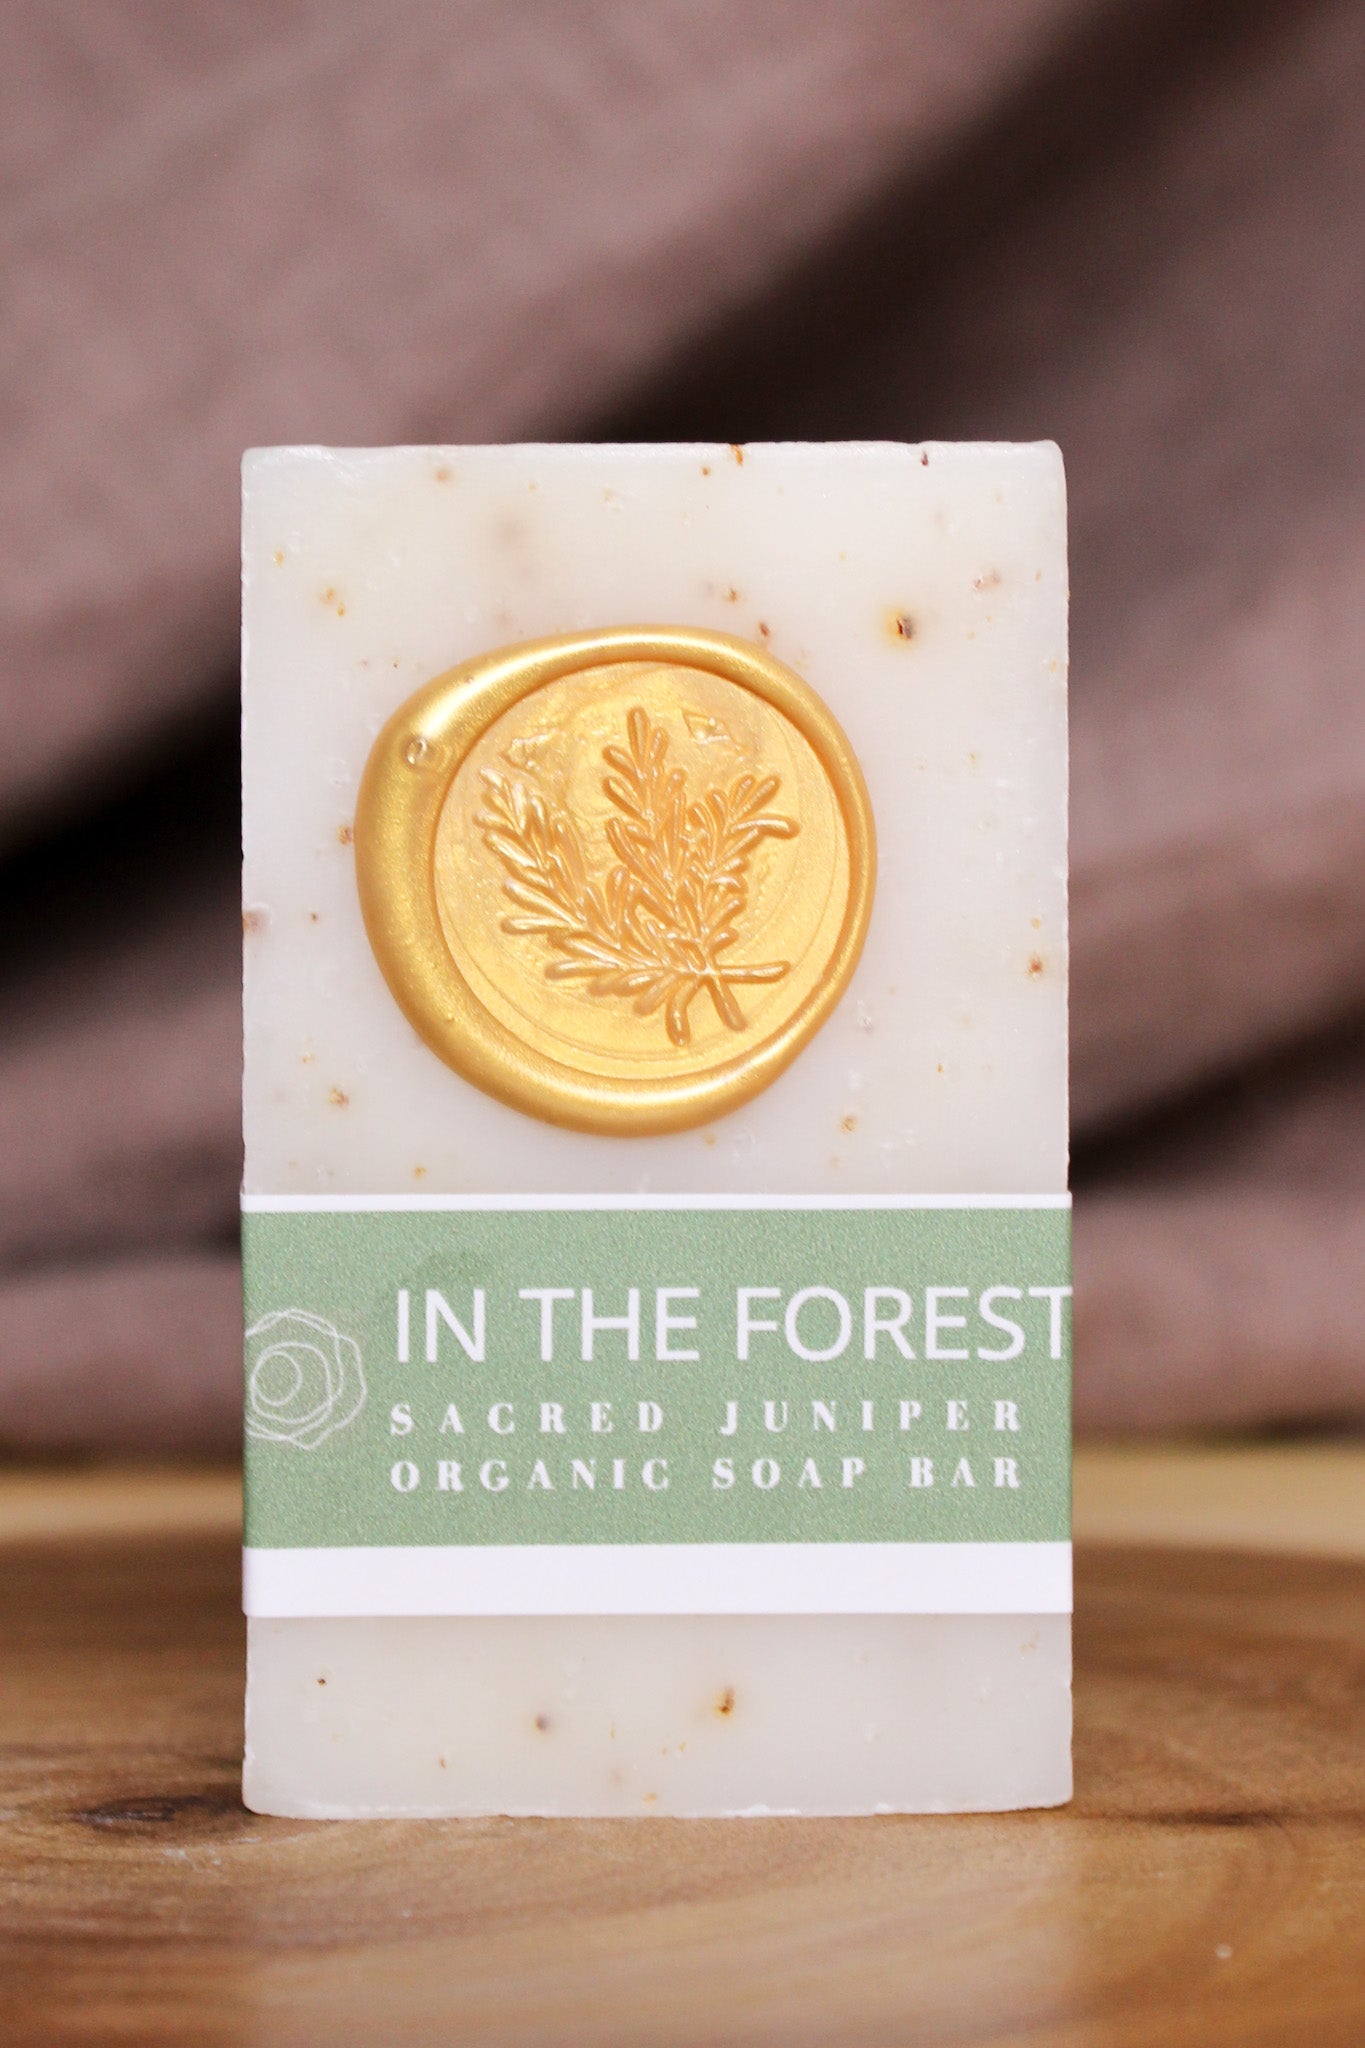 In The Forest Vegan Organic Bar Soap - Handmade with Natural Ingredients. Hidden Forest Naturals